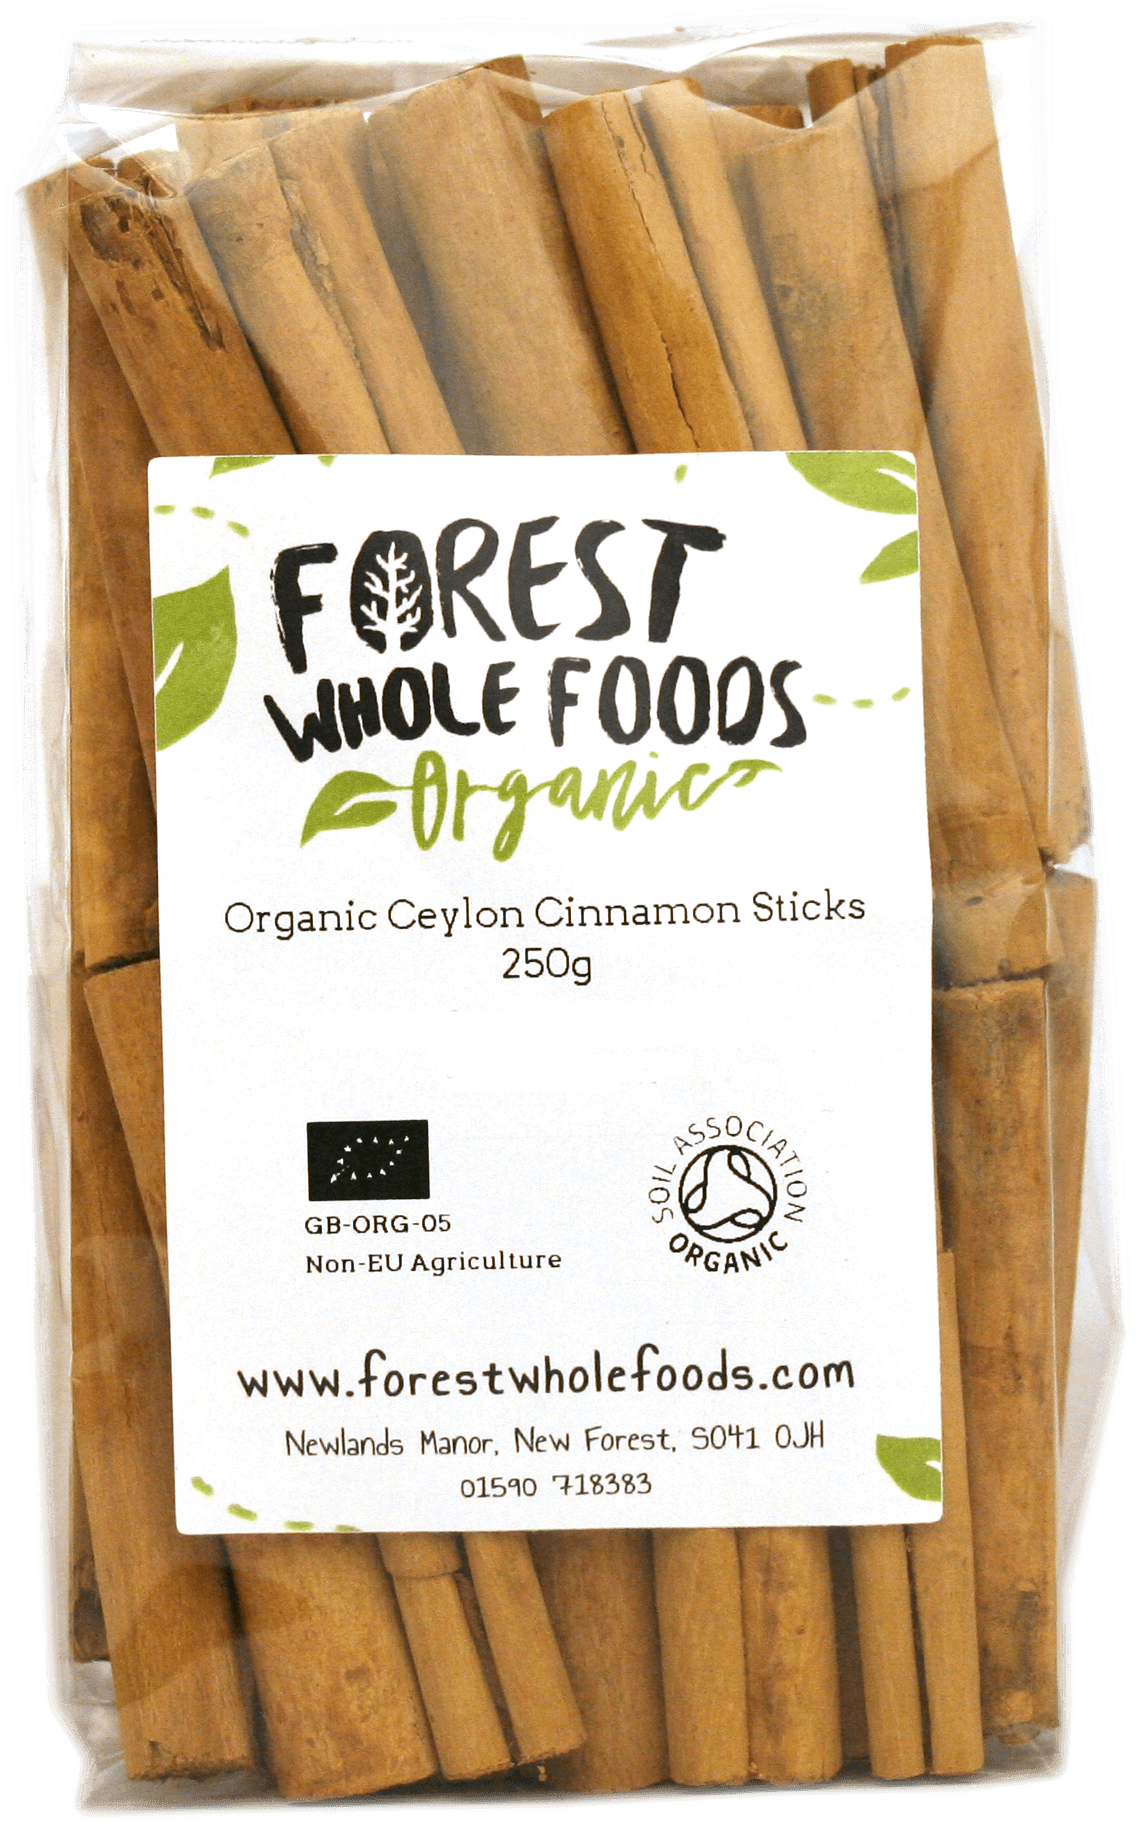 A Package Of Cinnamon Sticks